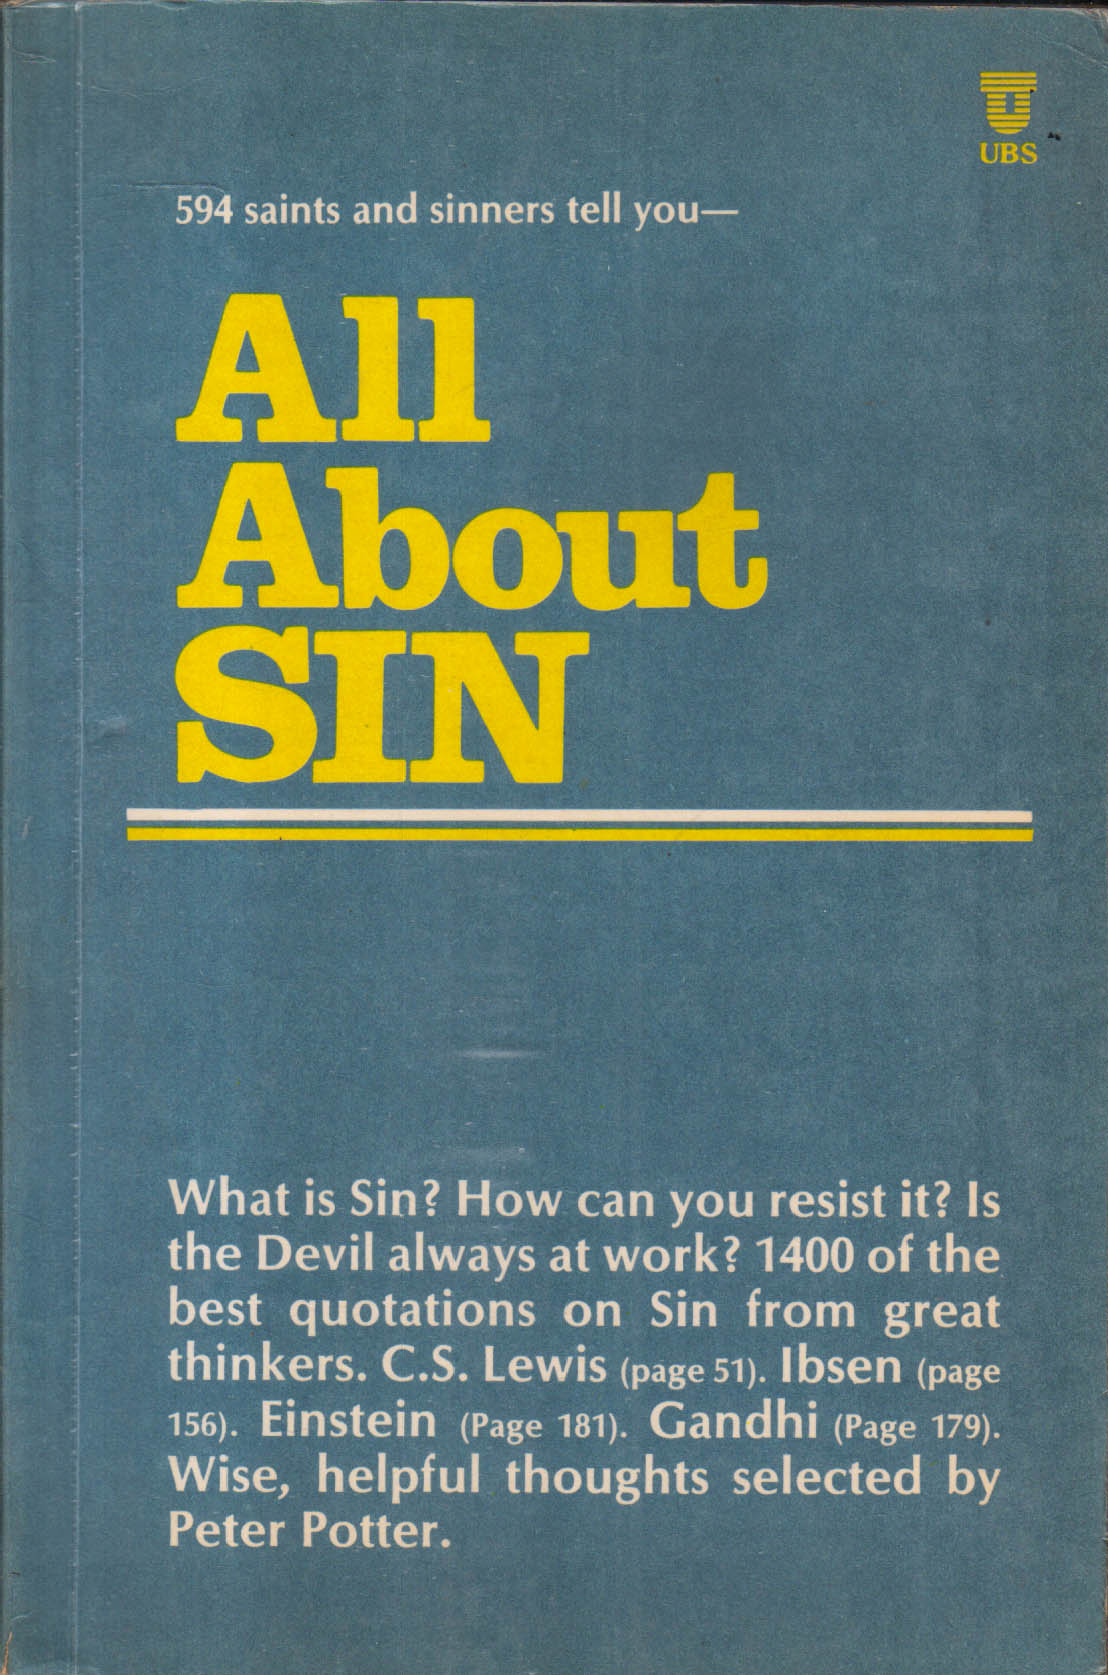 All About Sin